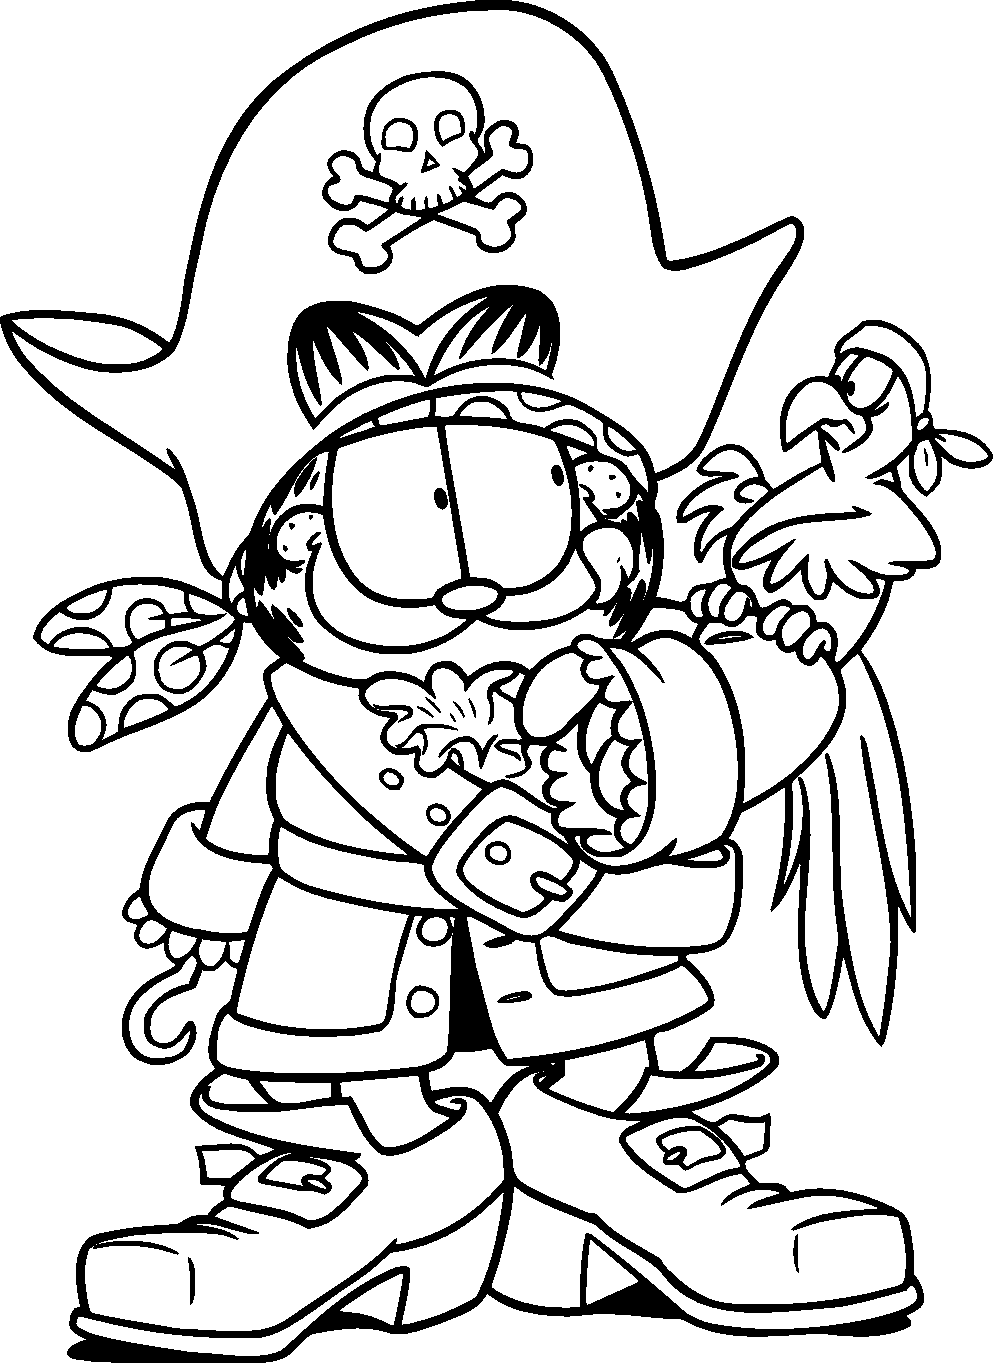 Garfield Coloring Pages Garfield   Coloring Home